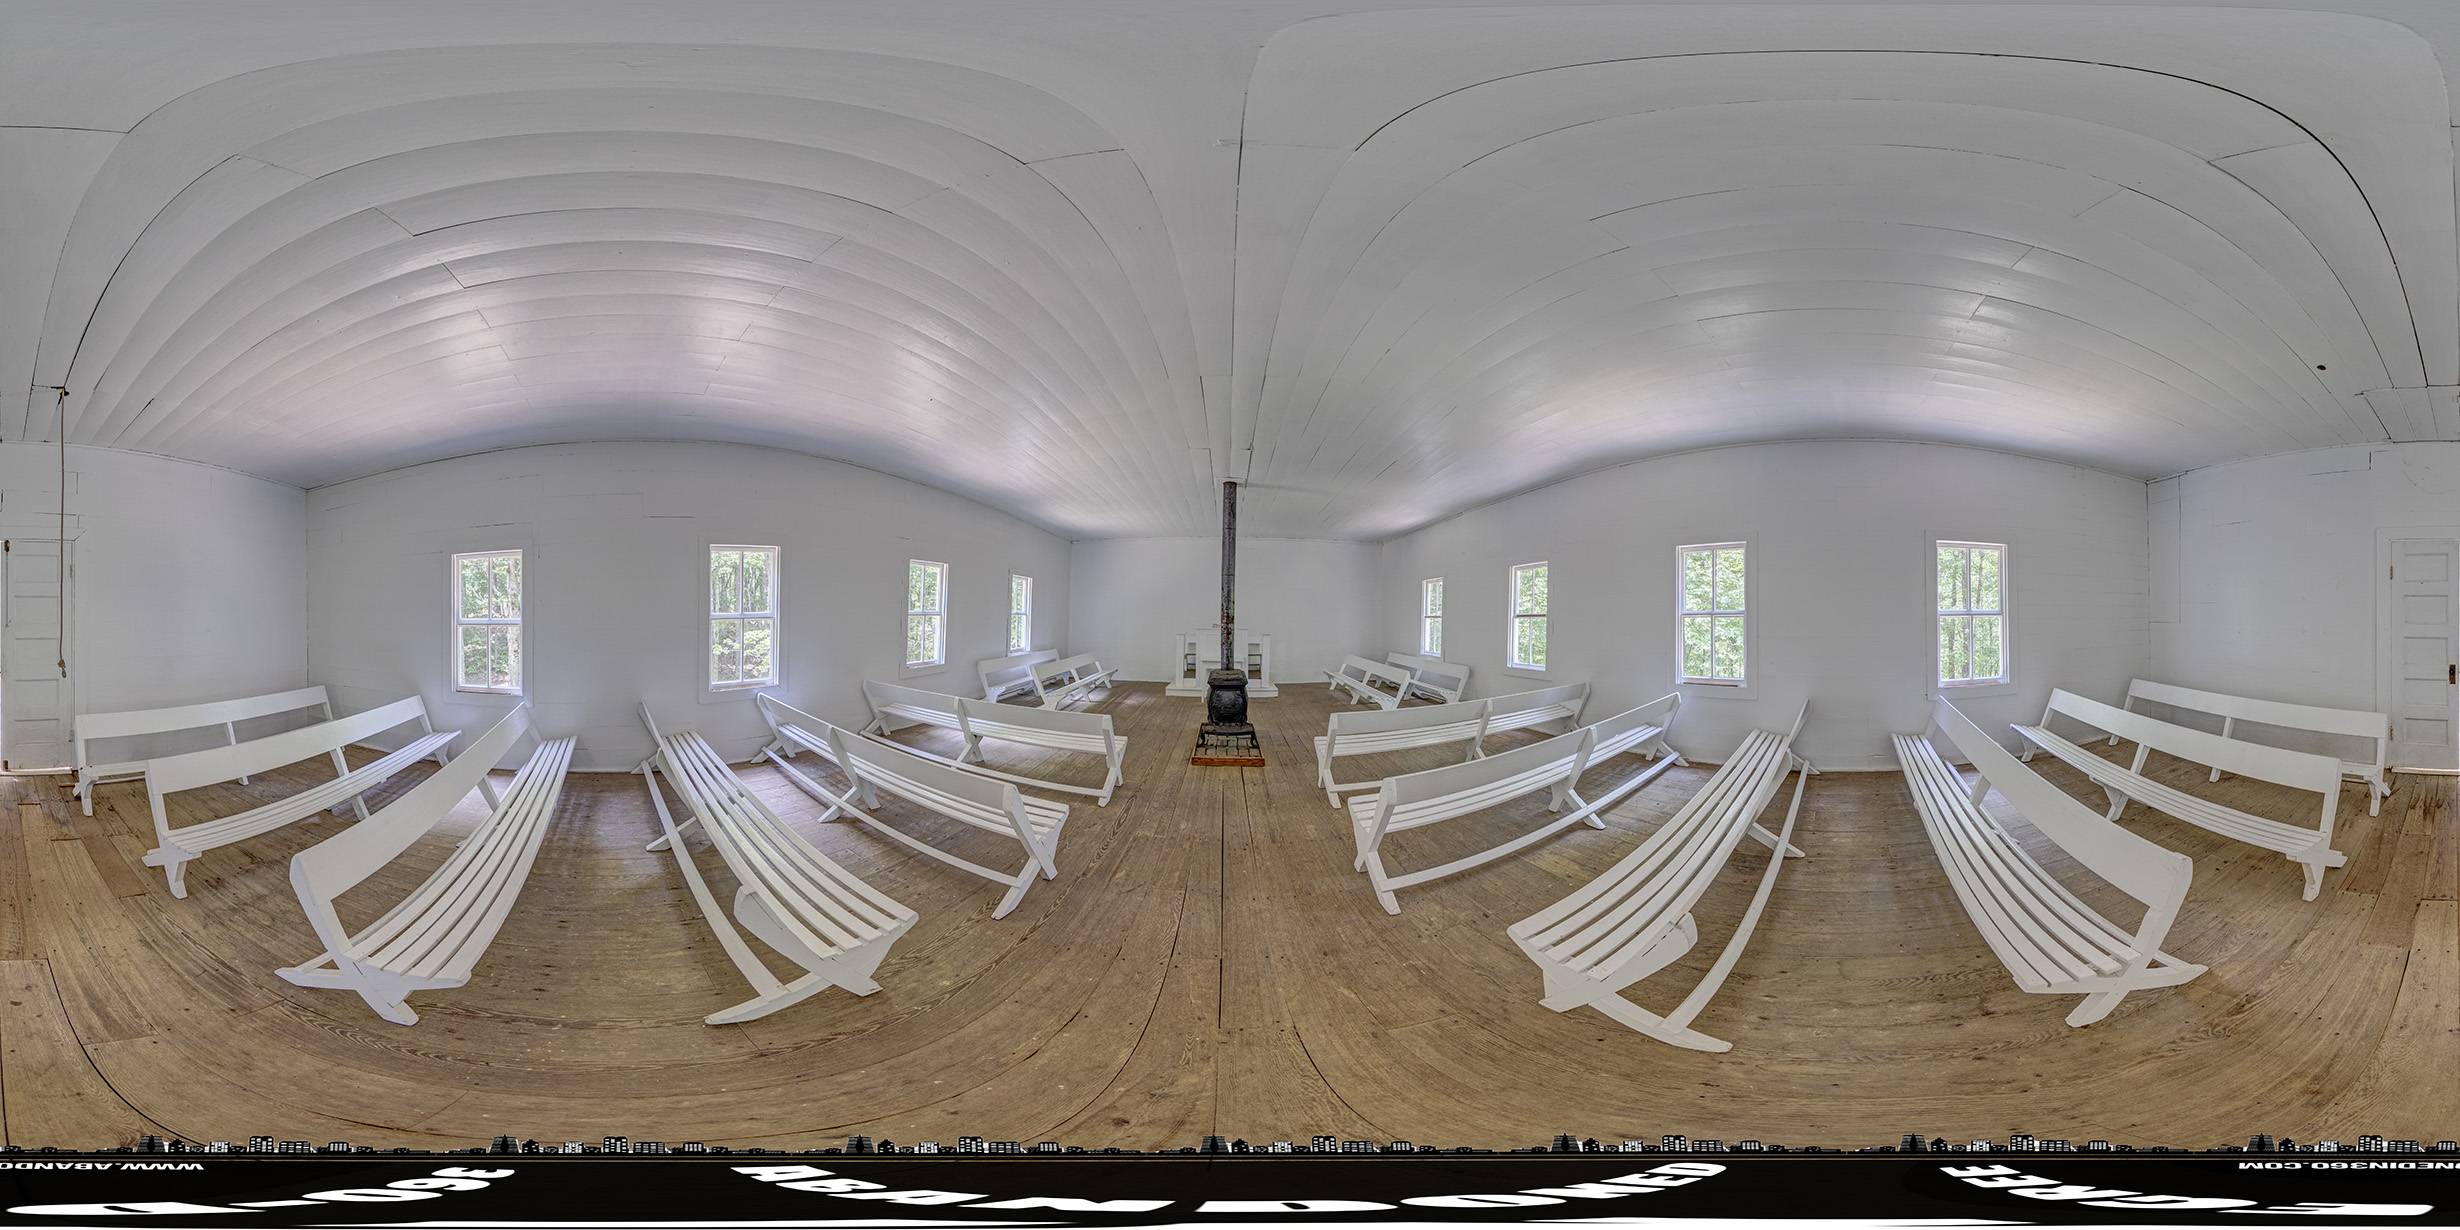 A 360-degree panoramic image captured inside the Little Cataloochee Baptist Church in the Great Smoky Mountains National Park in North Carolina. 